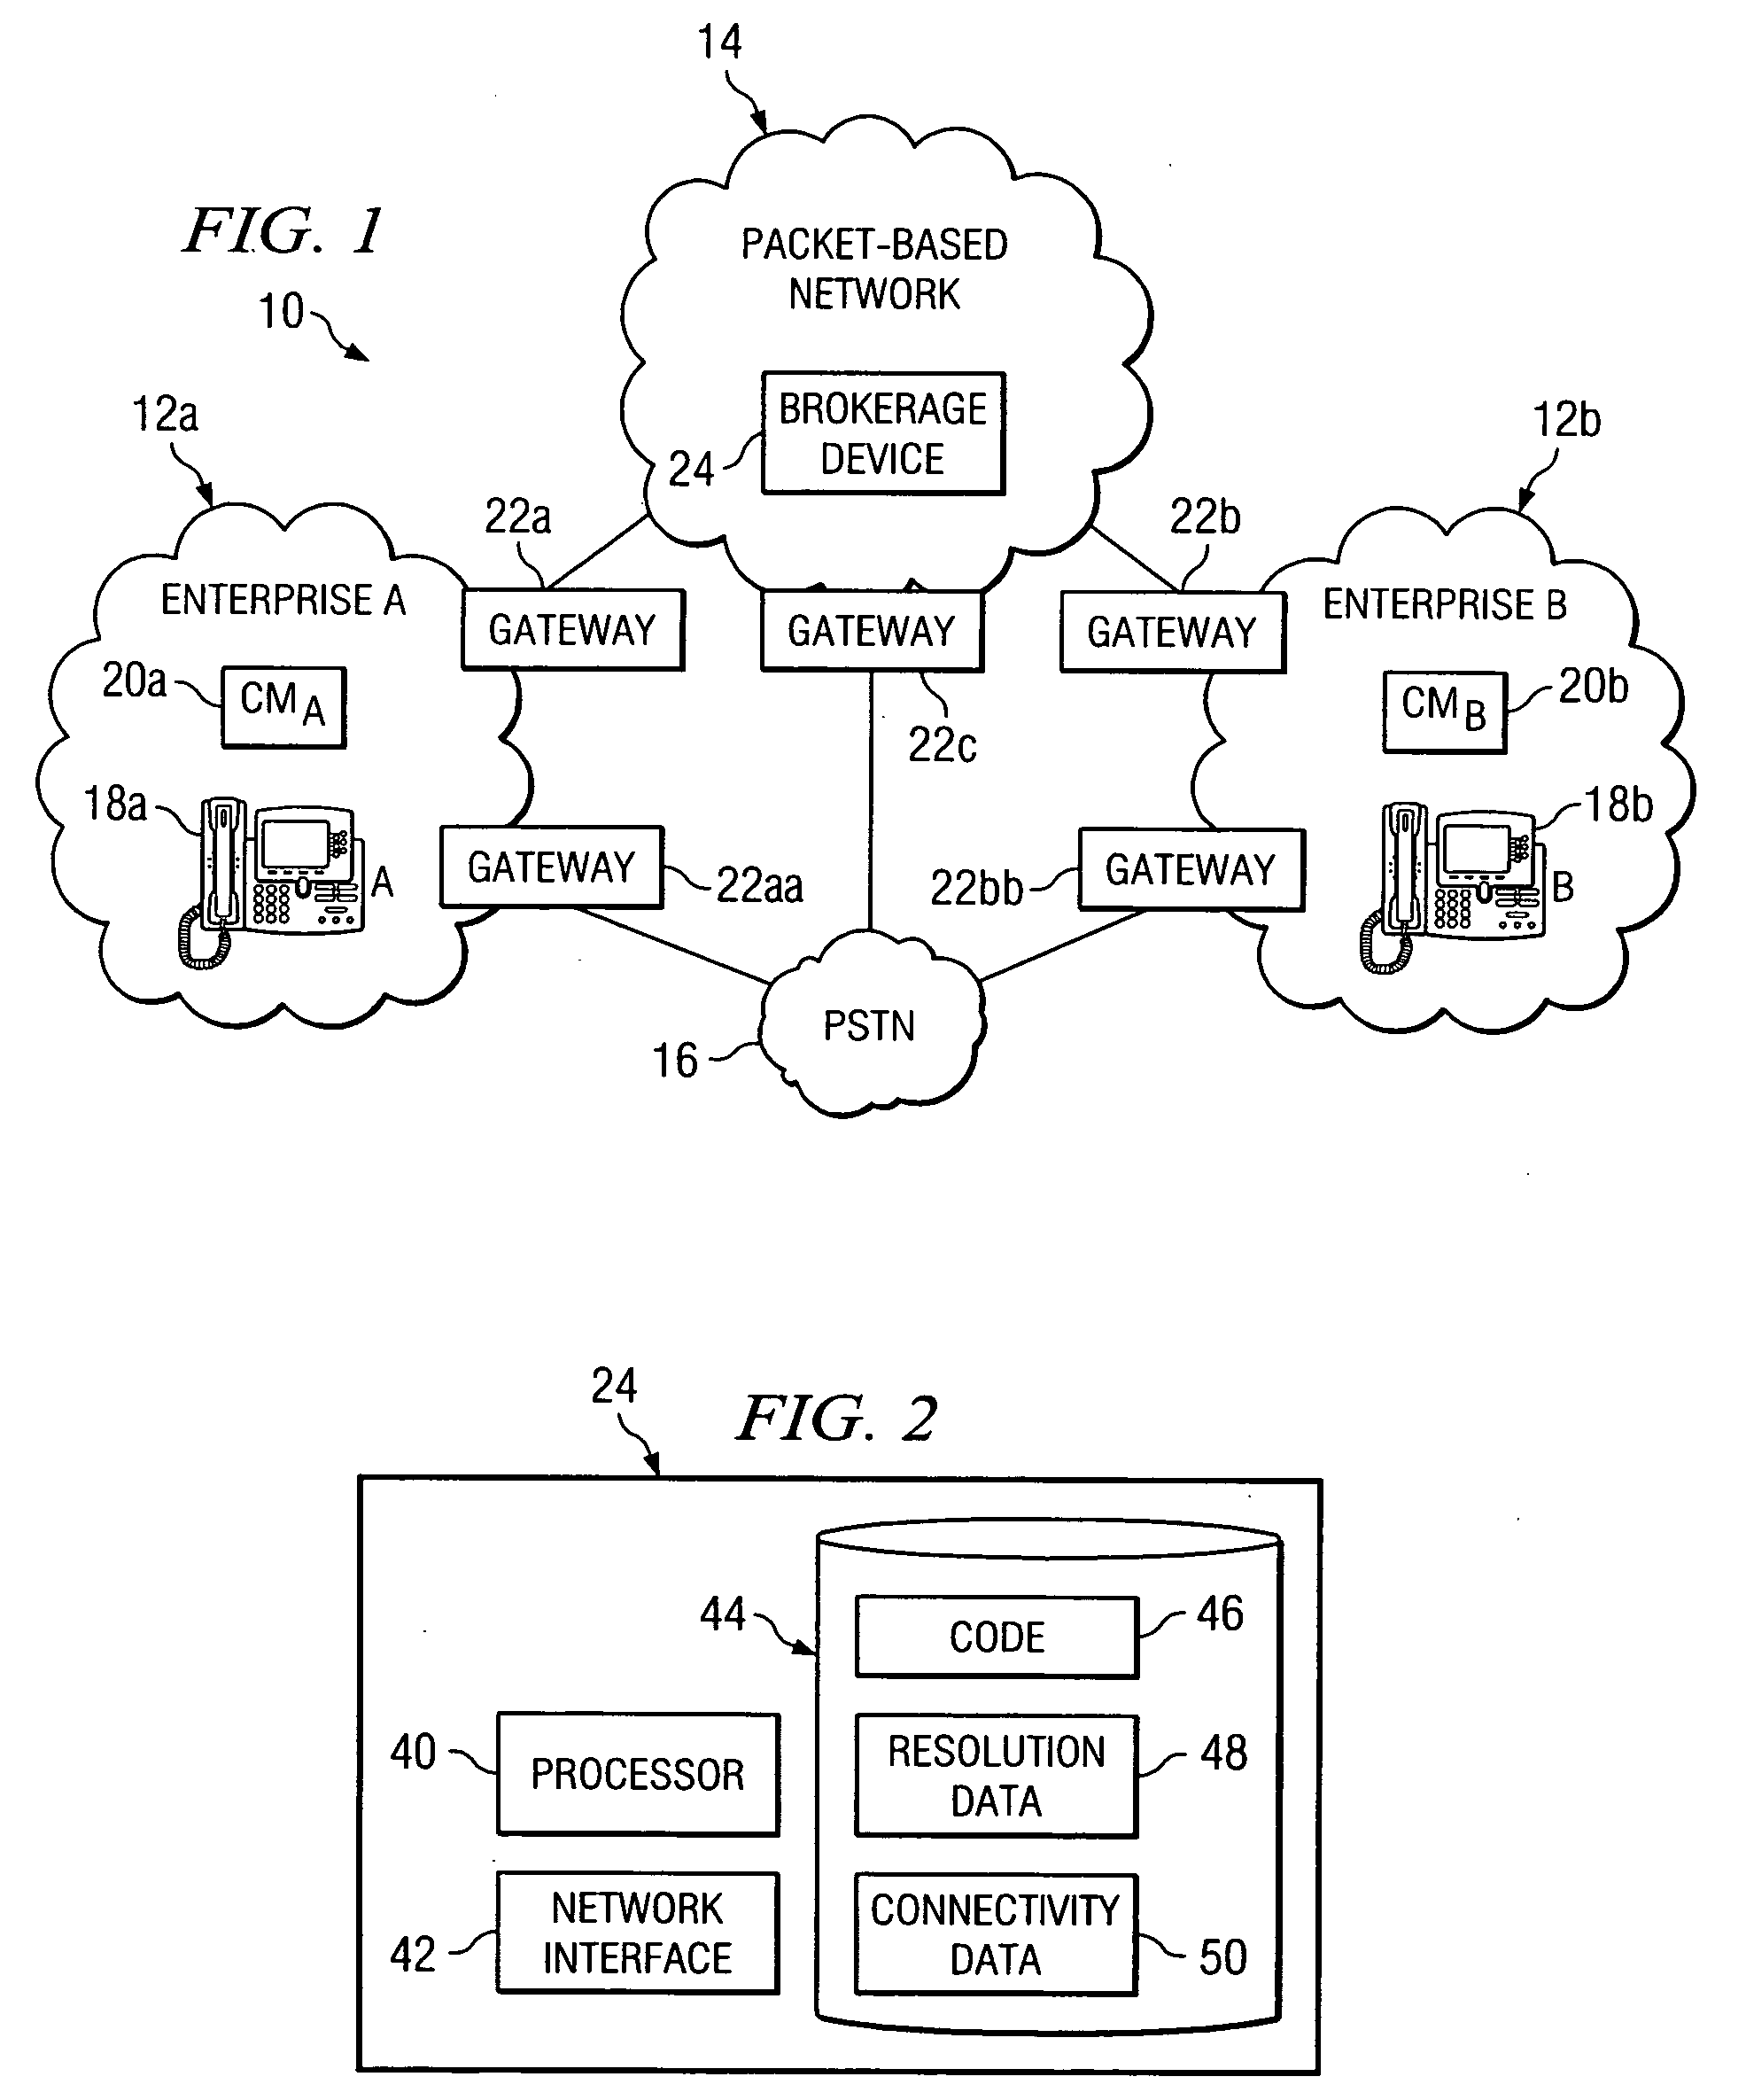 Inter-enterprise telephony using a central brokerage device